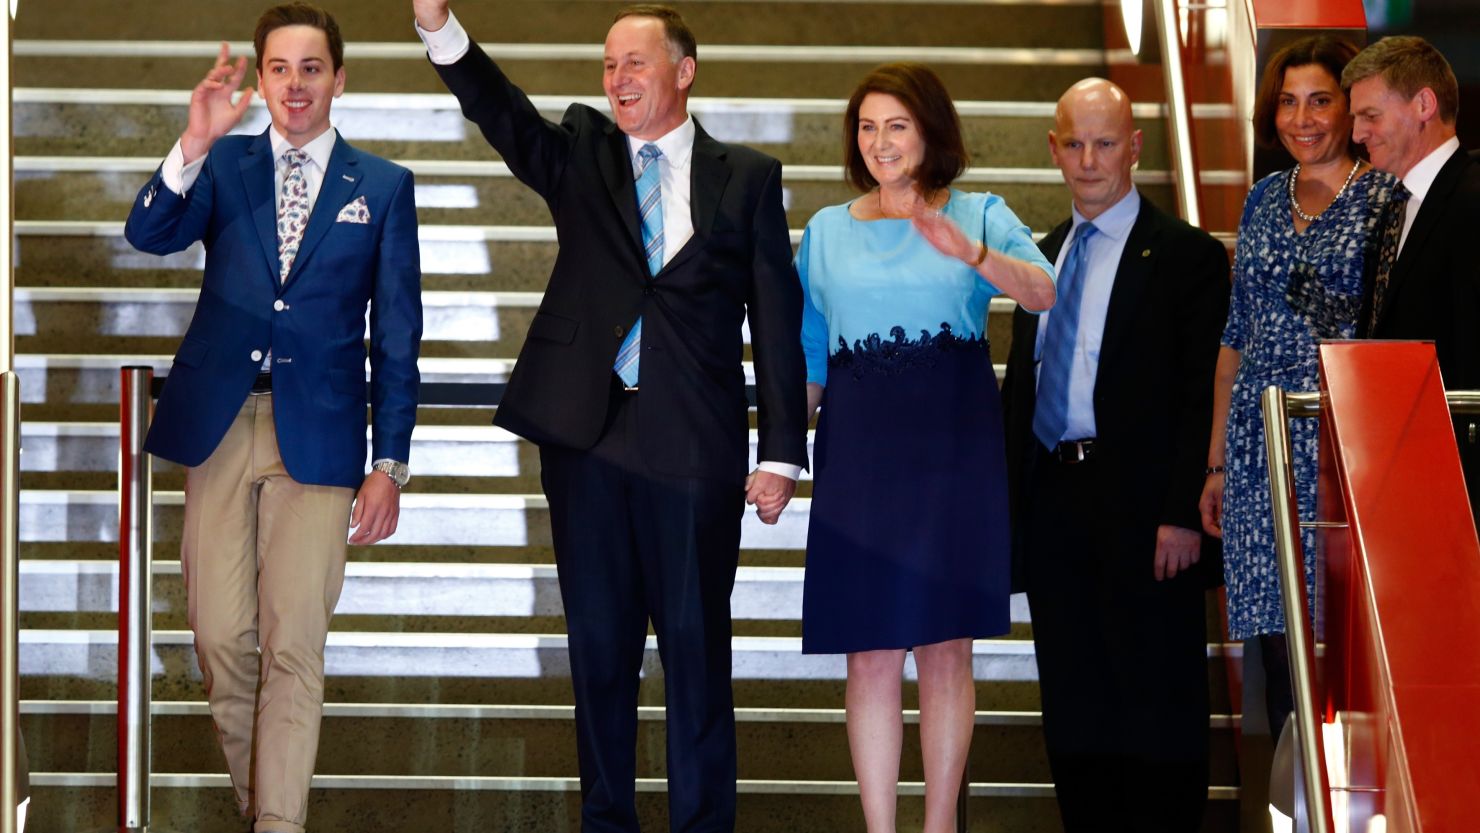 Prime Minister John Key arrives with his wife and son to deliver his victory speech at Viaduct Events Centre on September 20, 2014 in Auckland.